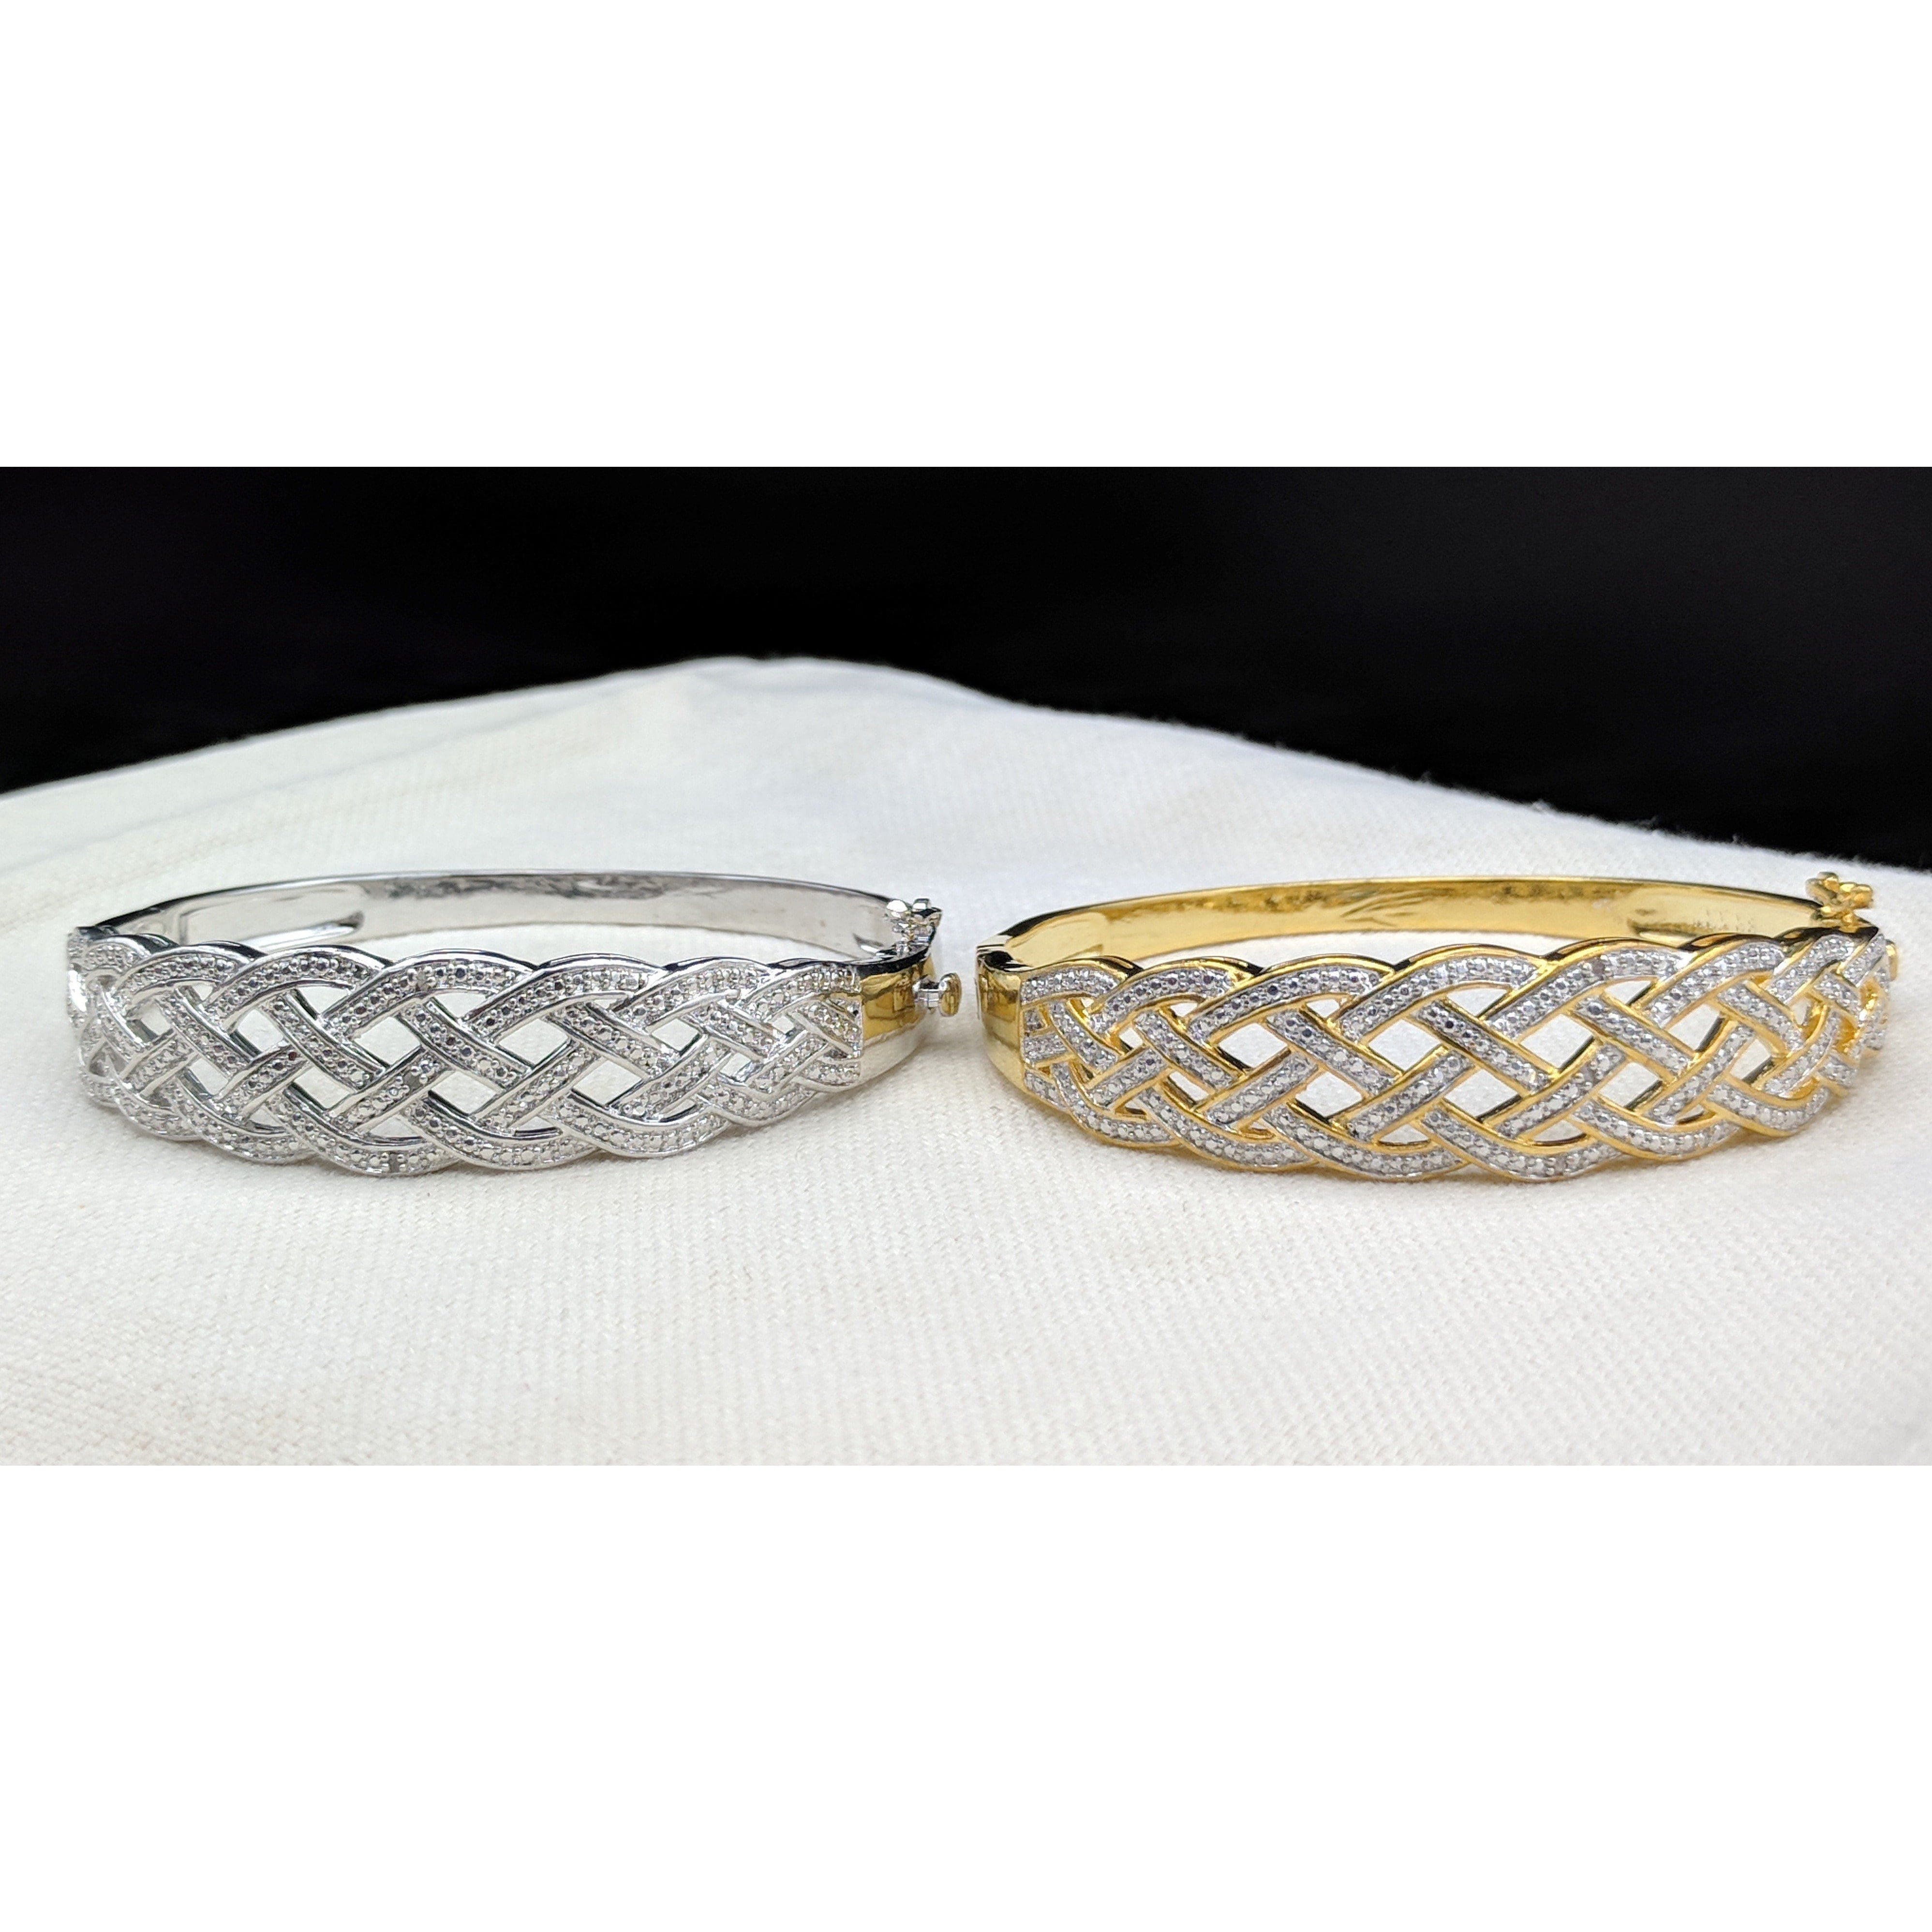 Natural Diamond Basket Weave Gold Plated Bangle Bracelet with REAL Diamonds! Very Affordable! - The Pink Pigs, A Compassionate Boutique